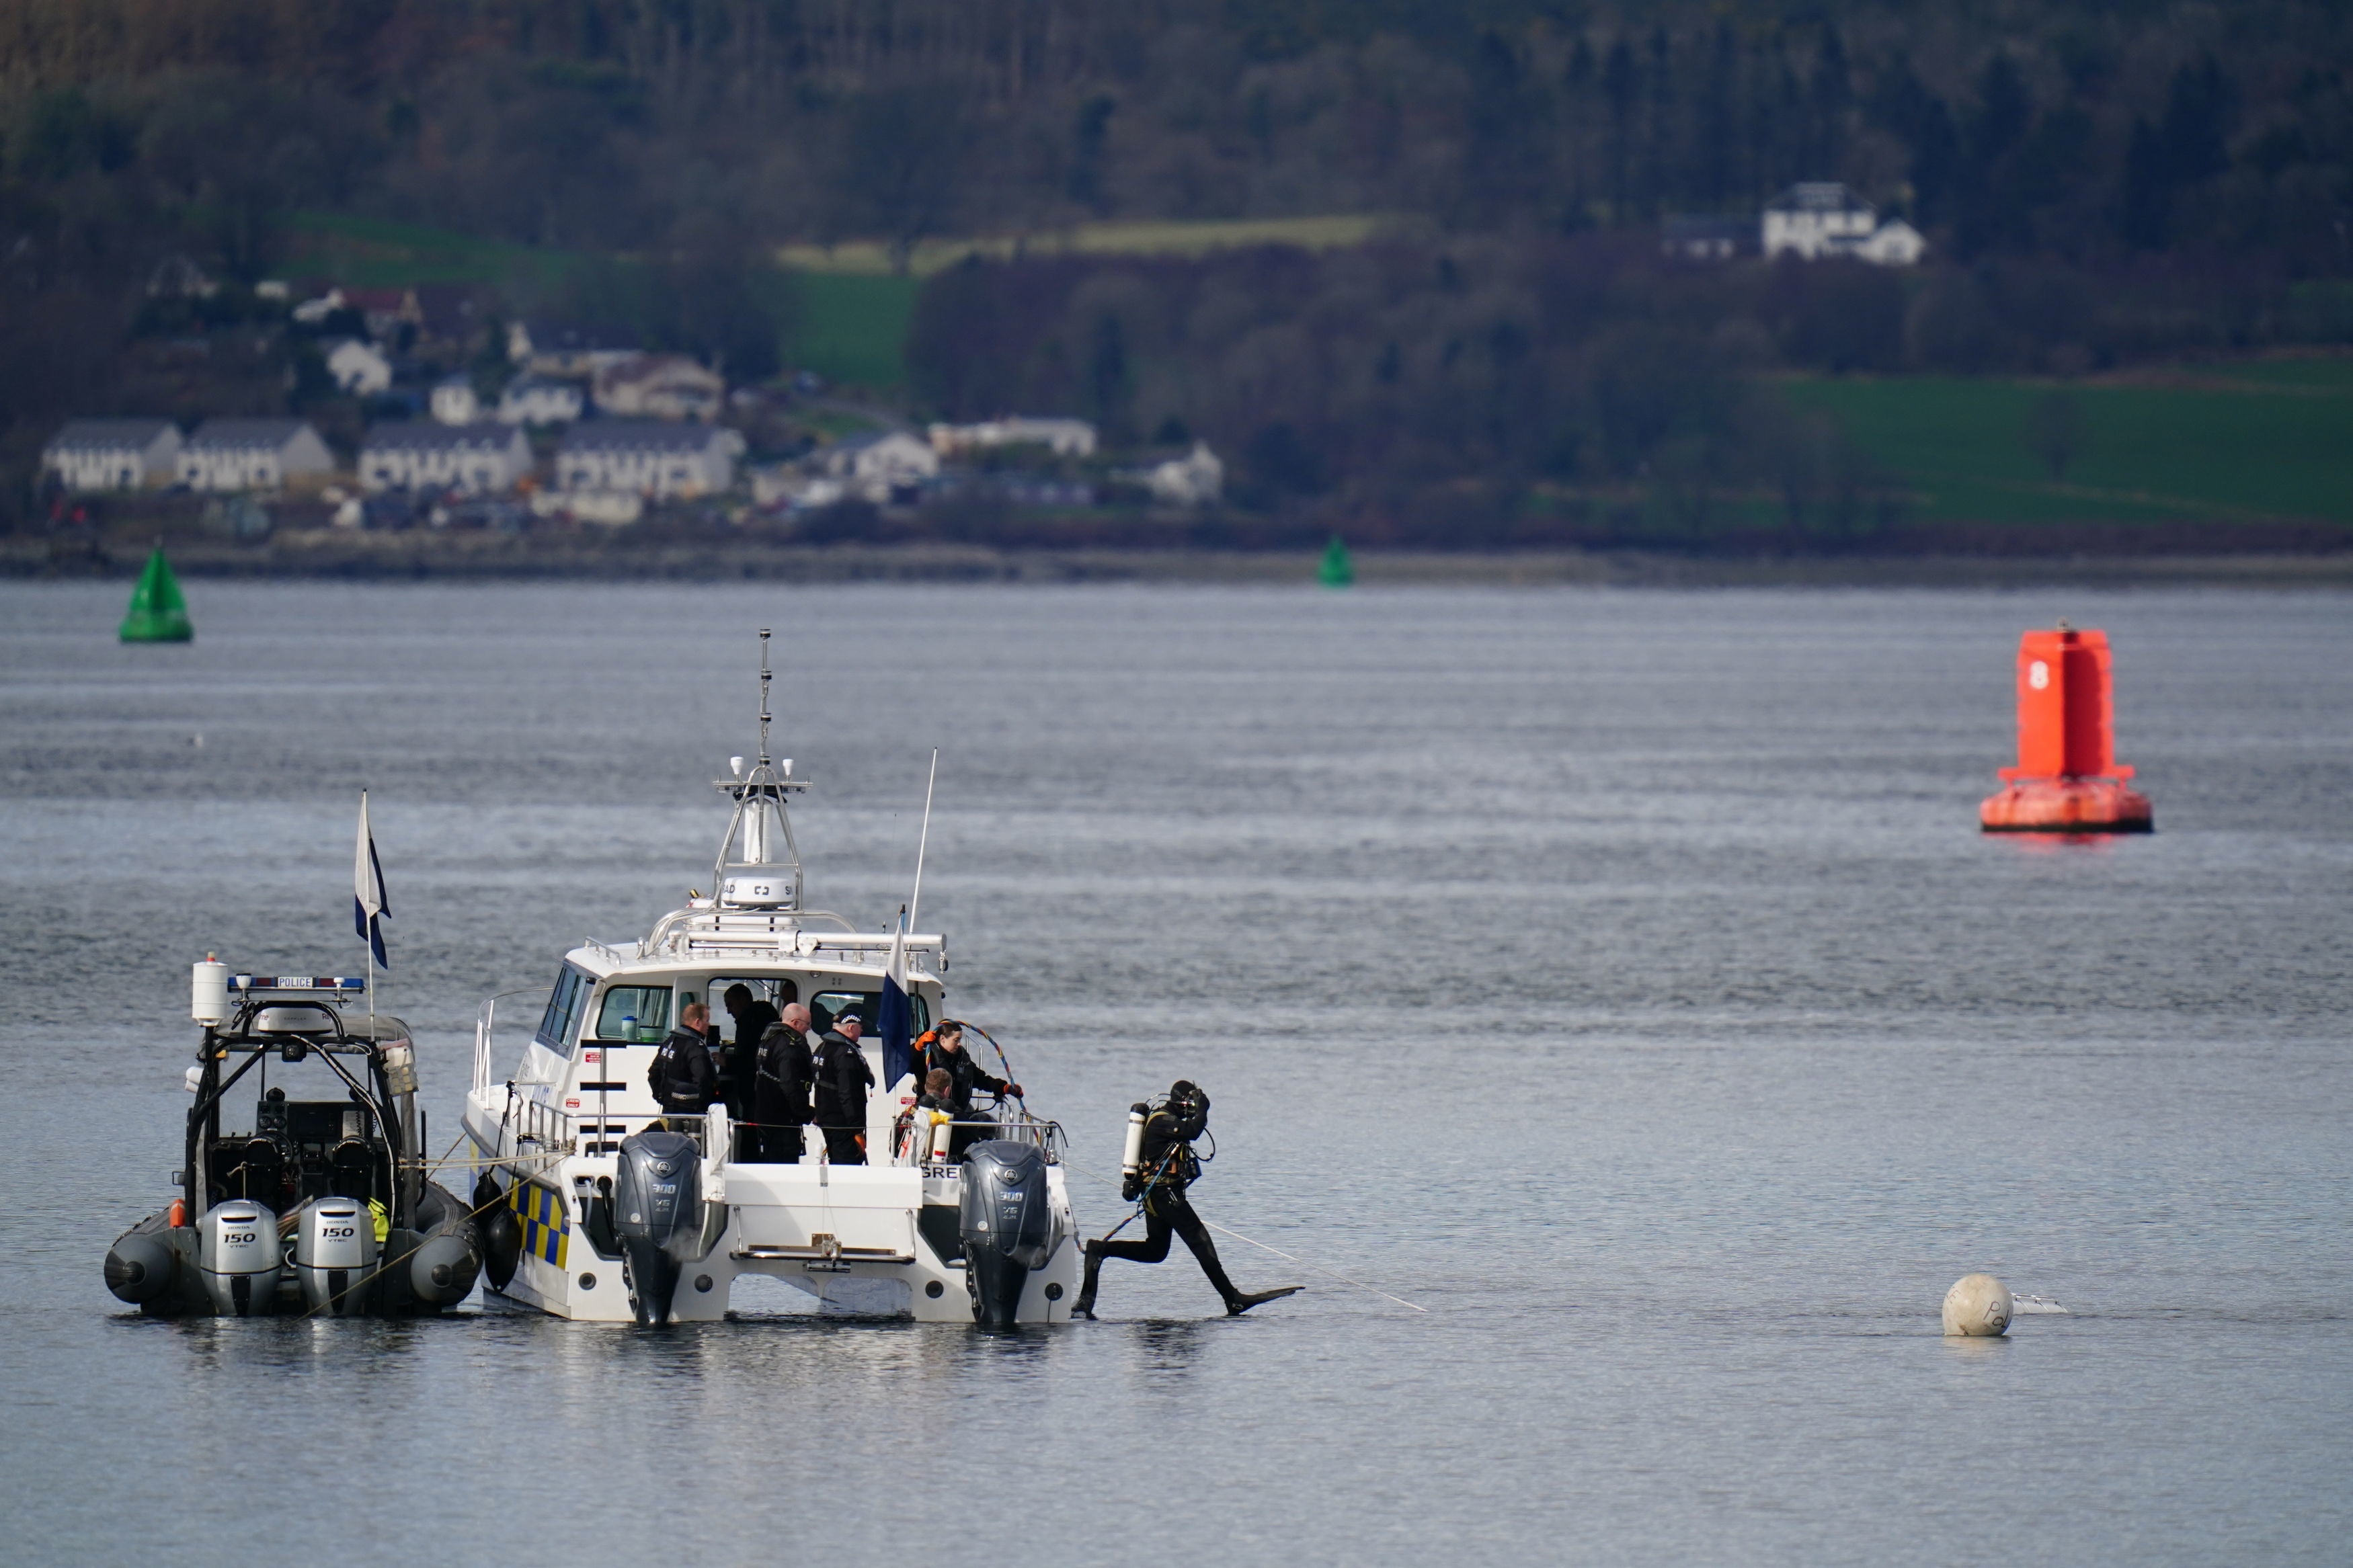 Police boats and divers taking part in the rescue operation in the Firth of Clyde